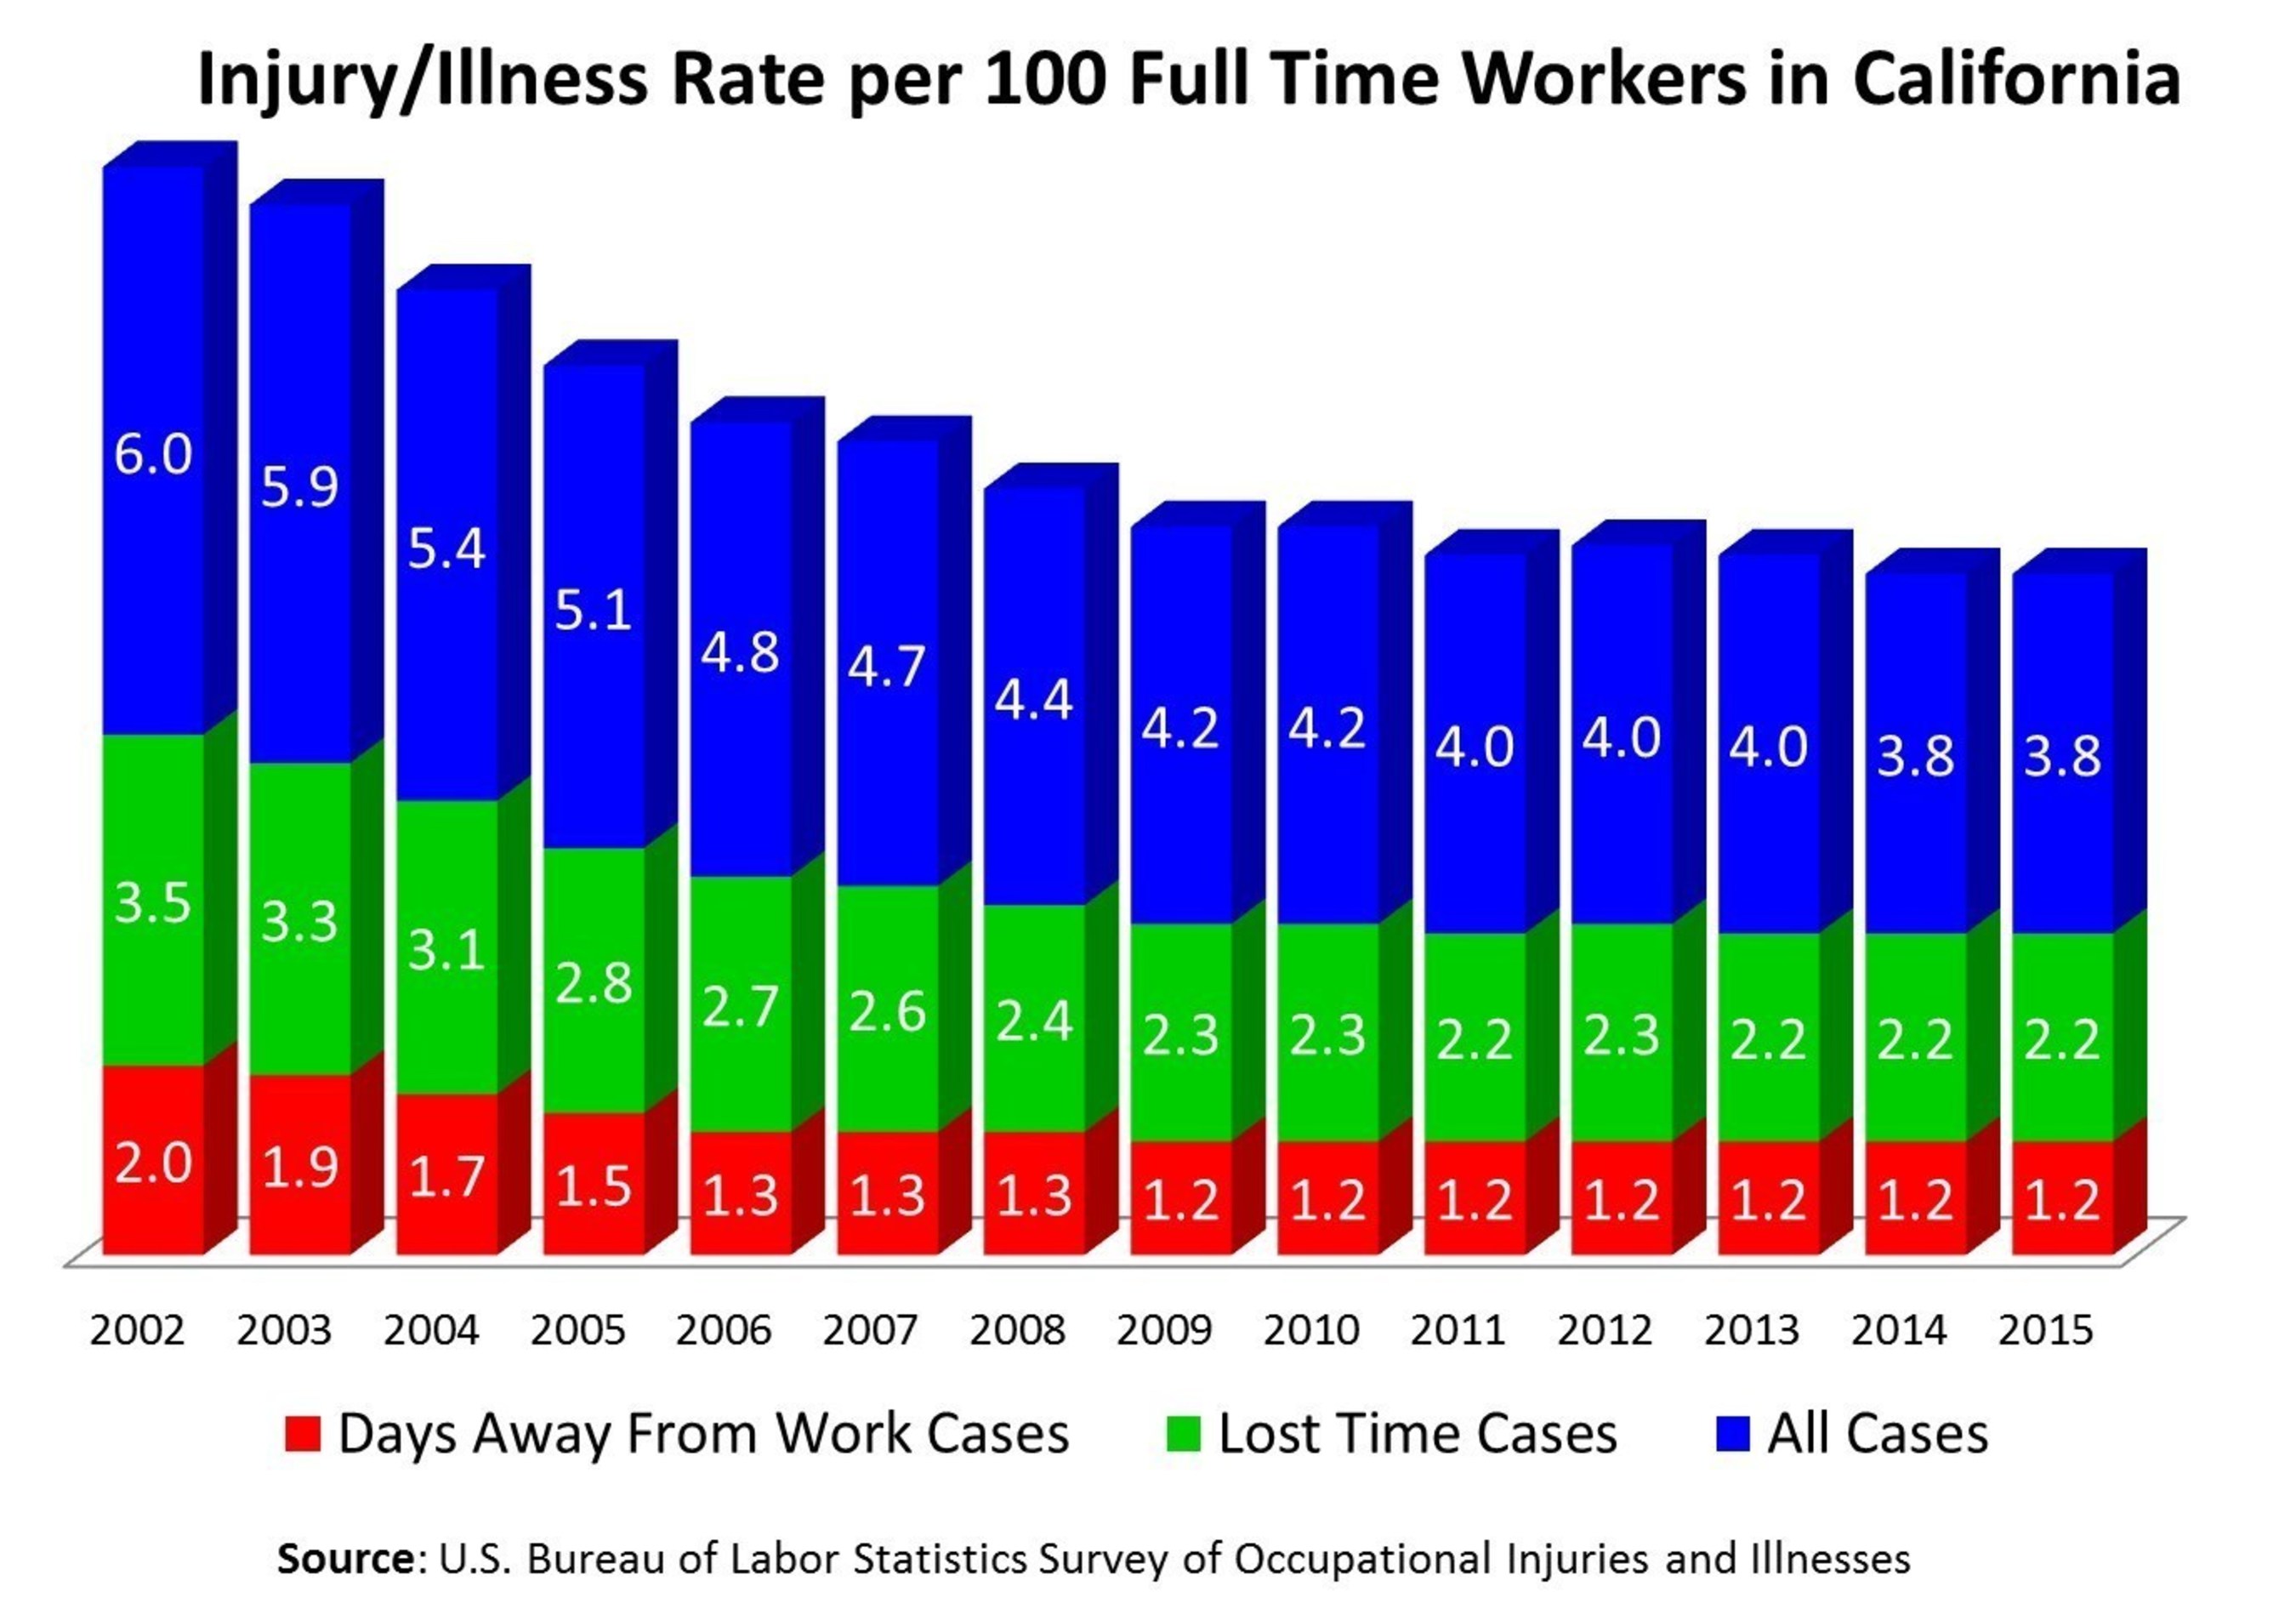 Injury/Illness Rate per 100 Full Time Workers in California, 2002 - 2015